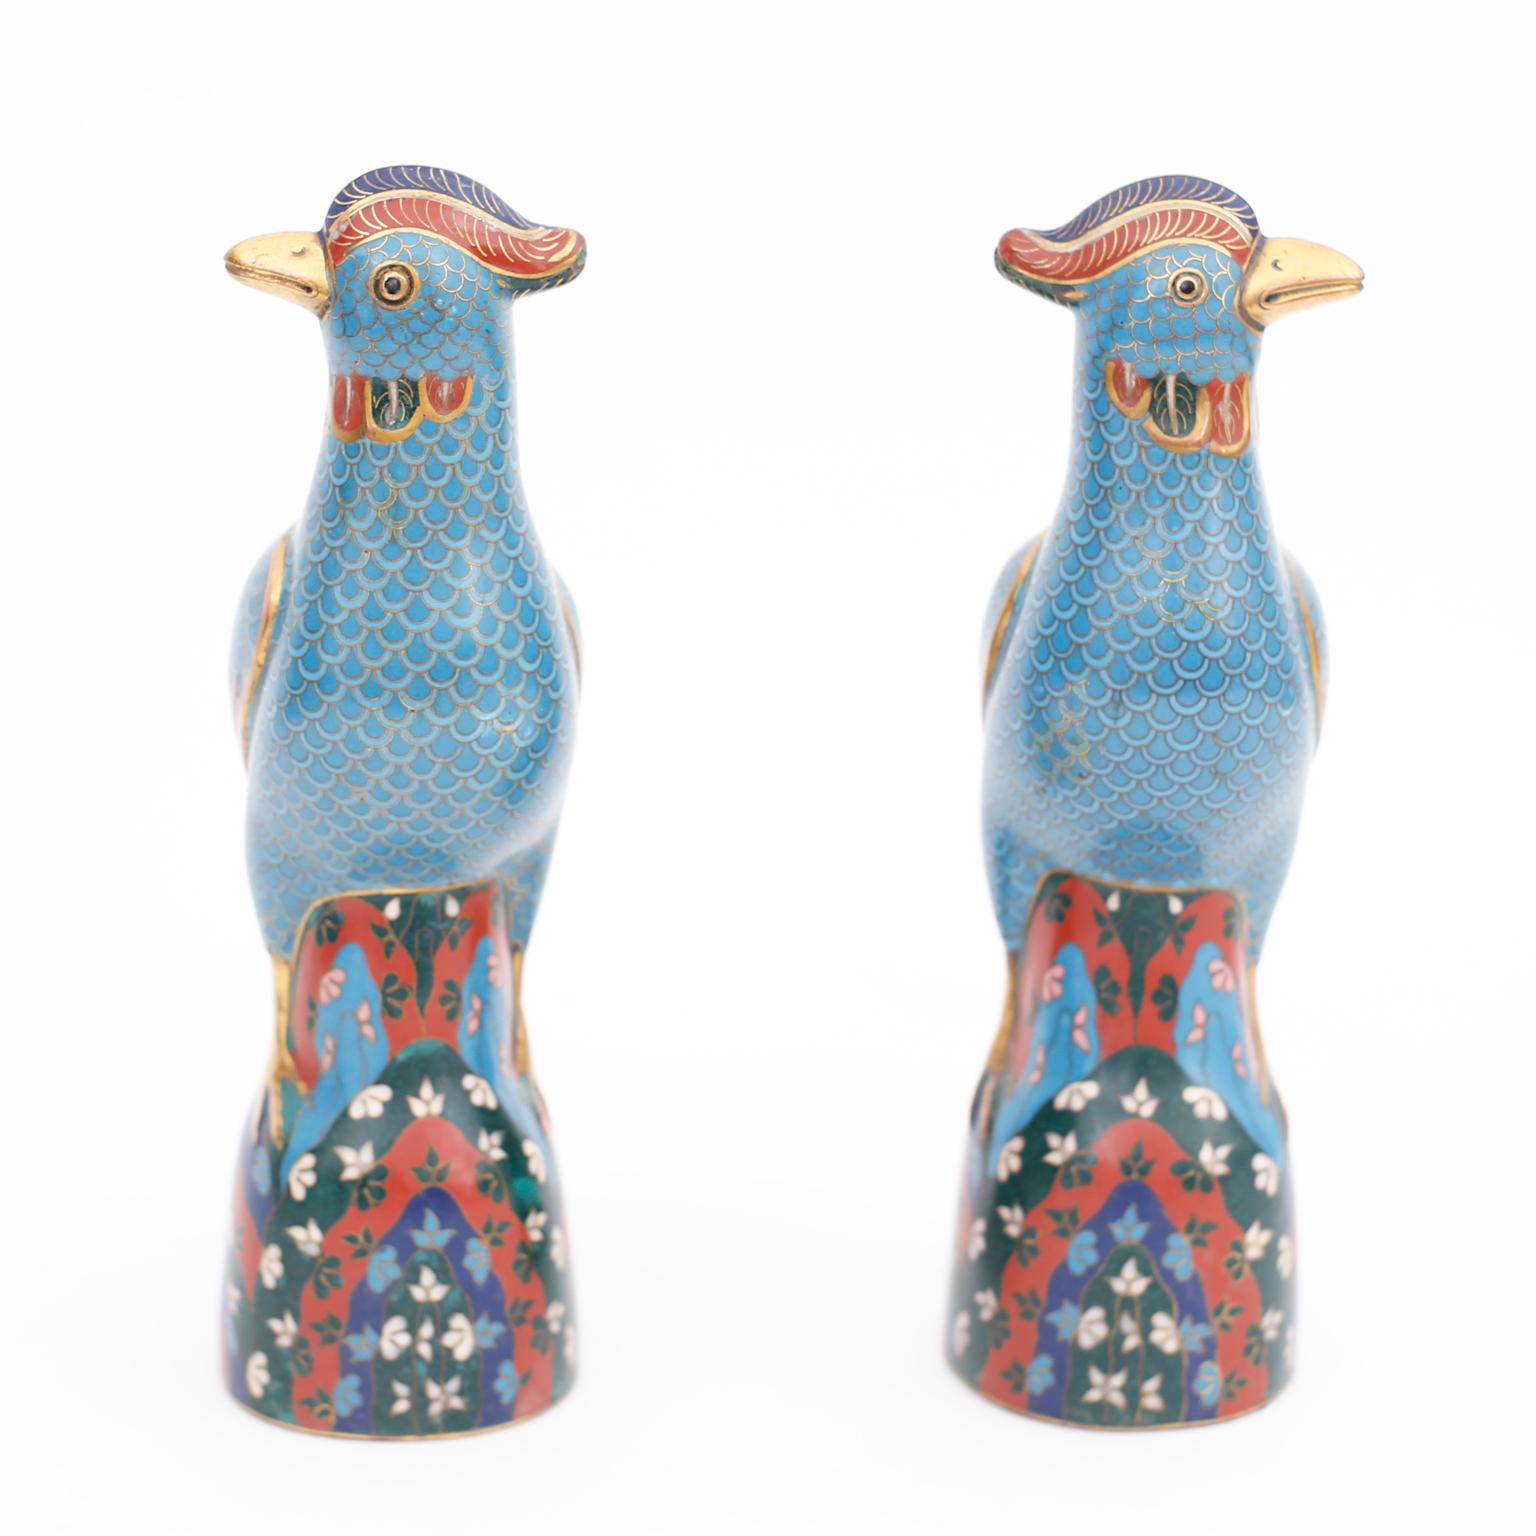 Intriguing pair of vintage Chinese cloisonne or enamel on brass birds with quizzical expressions, colorful wings and tails, blue bodies and floral bases.